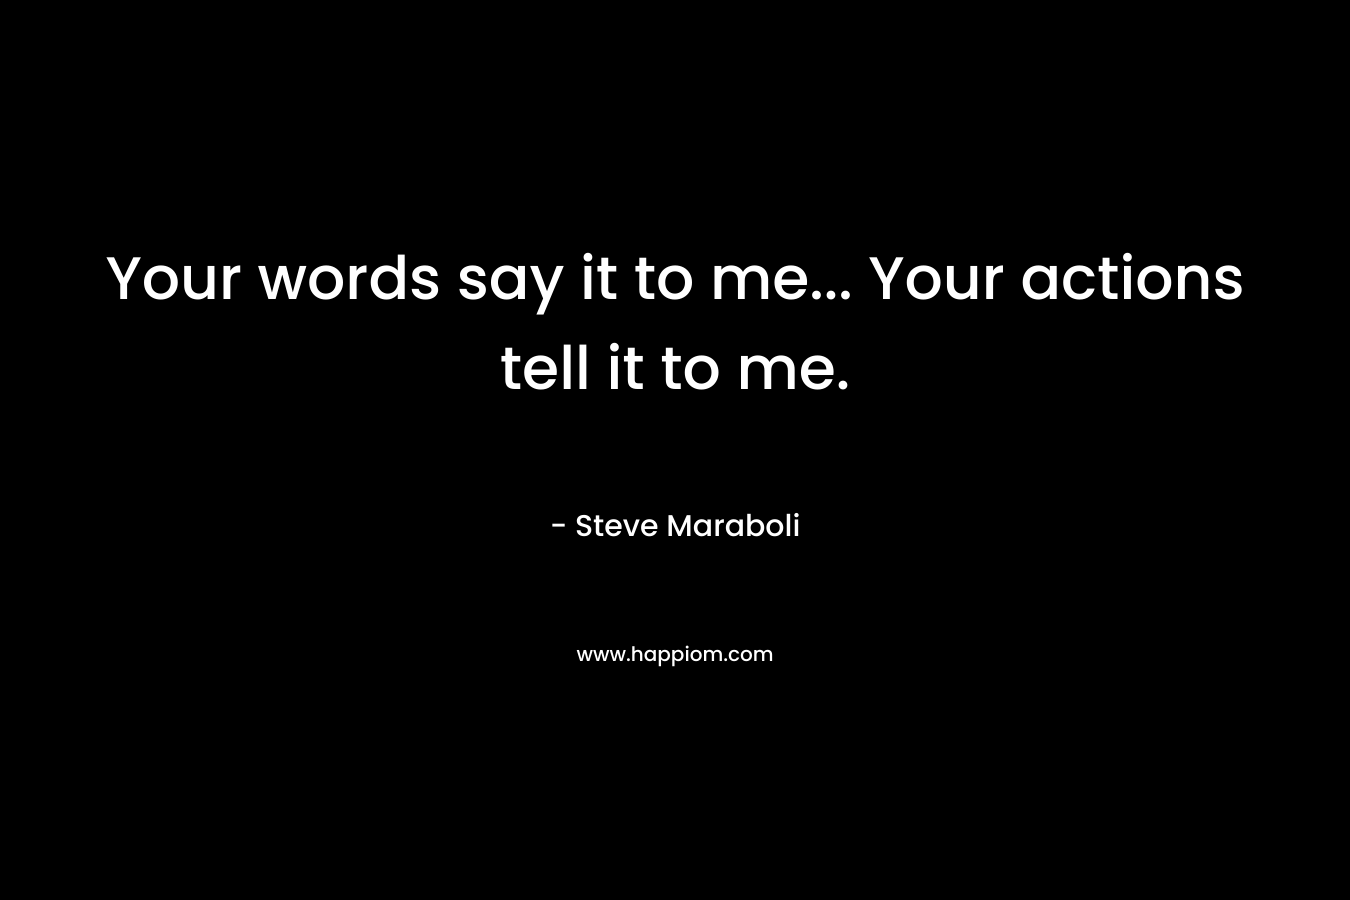 Your words say it to me... Your actions tell it to me.